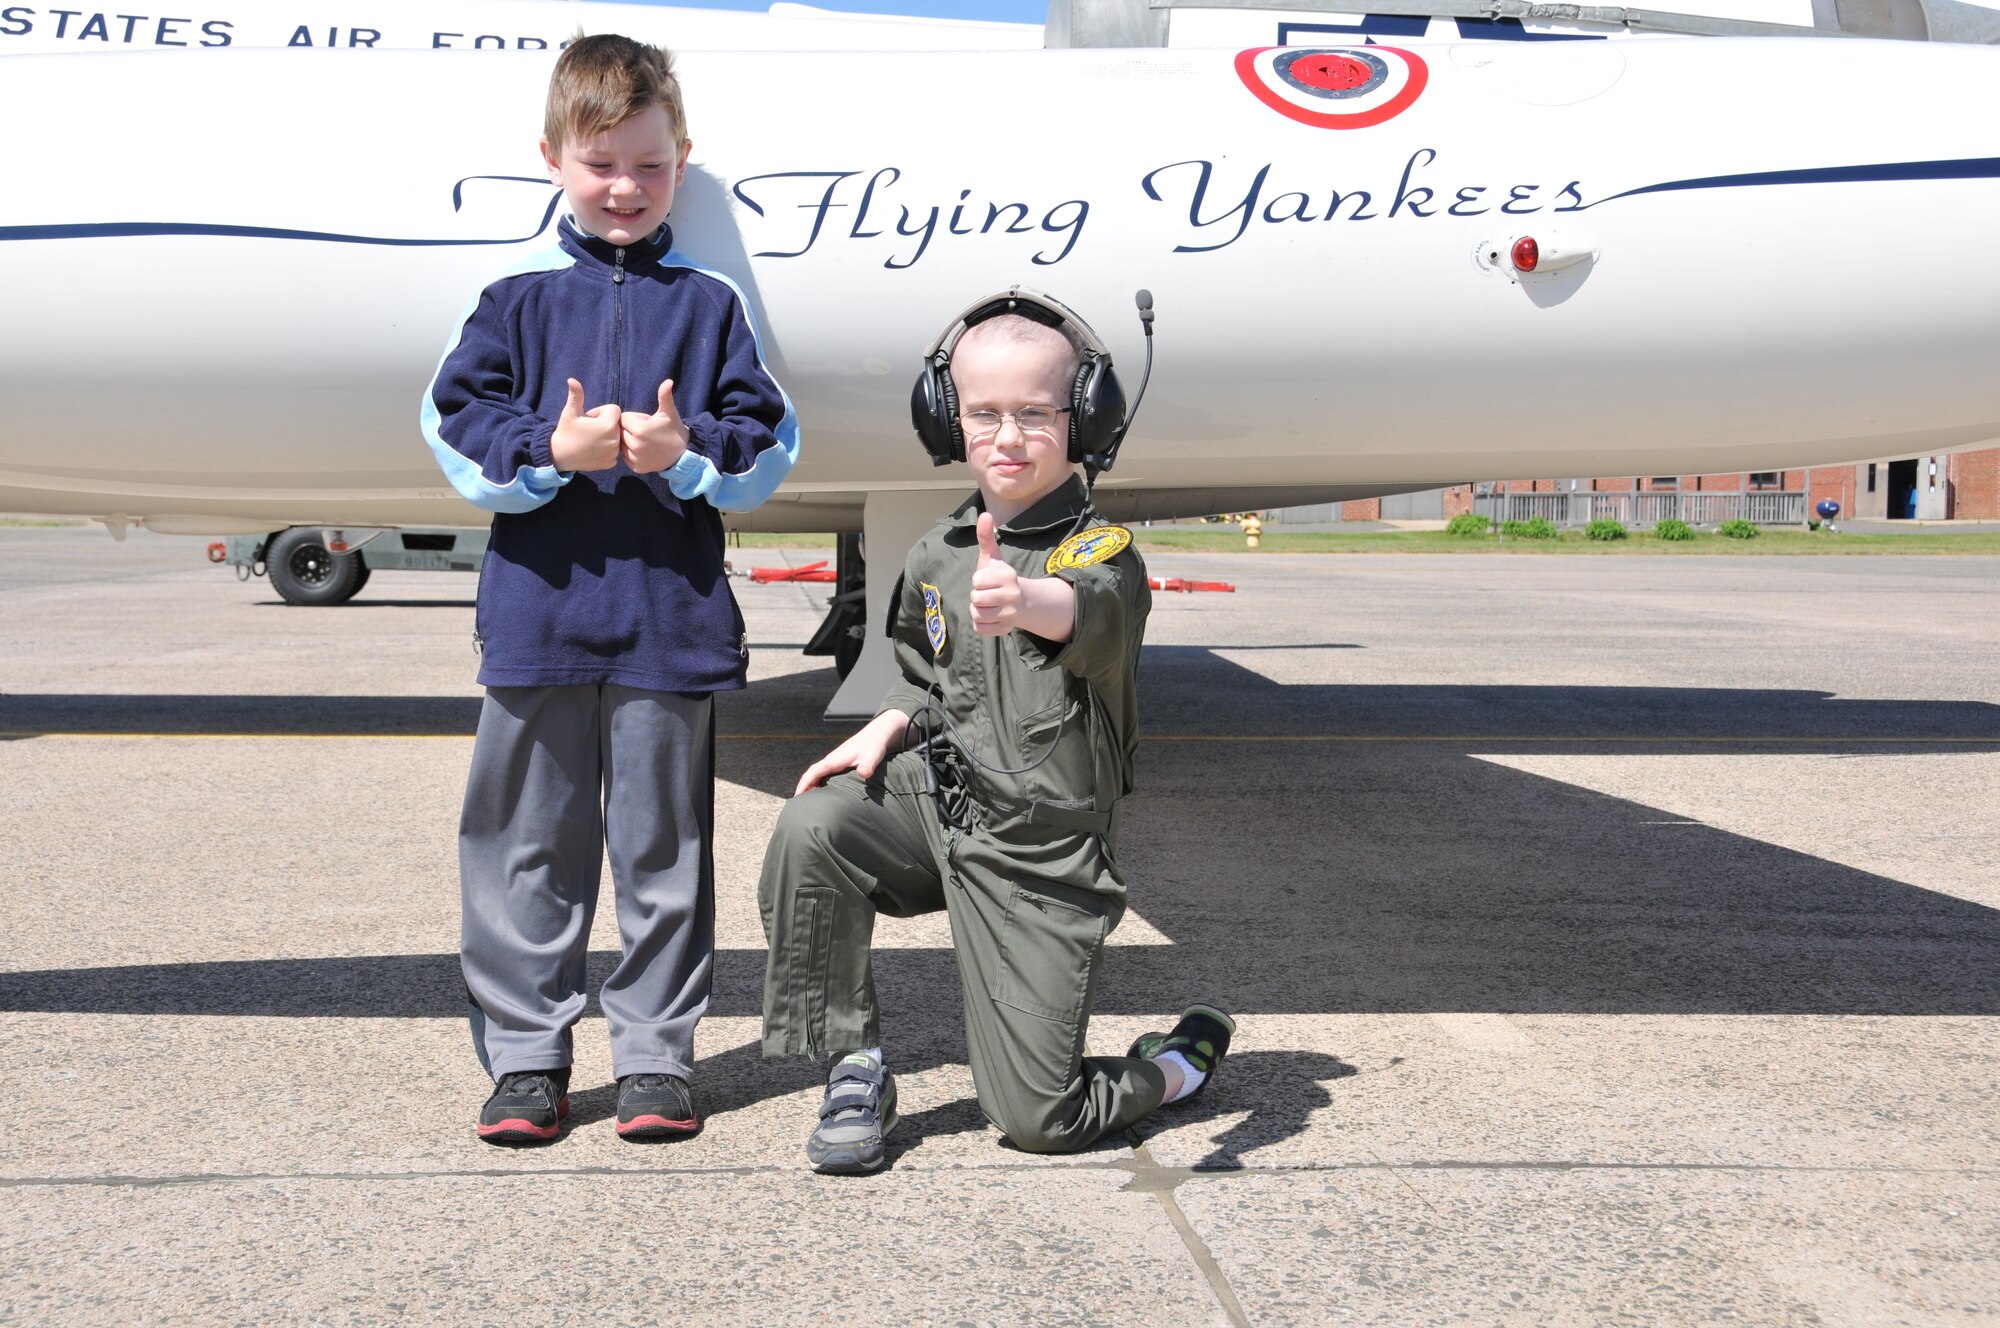 Logan Schoenhardt and his friend, Andrew Kerwin, give thumbs up in front of a C-21 during the Pilot for A Day Program at Bradley Air National Guard Base, East Granby, Conn., May 3, 2013. (Air National Guard photo by 1st Lt. Dawn Surprenant/Released)